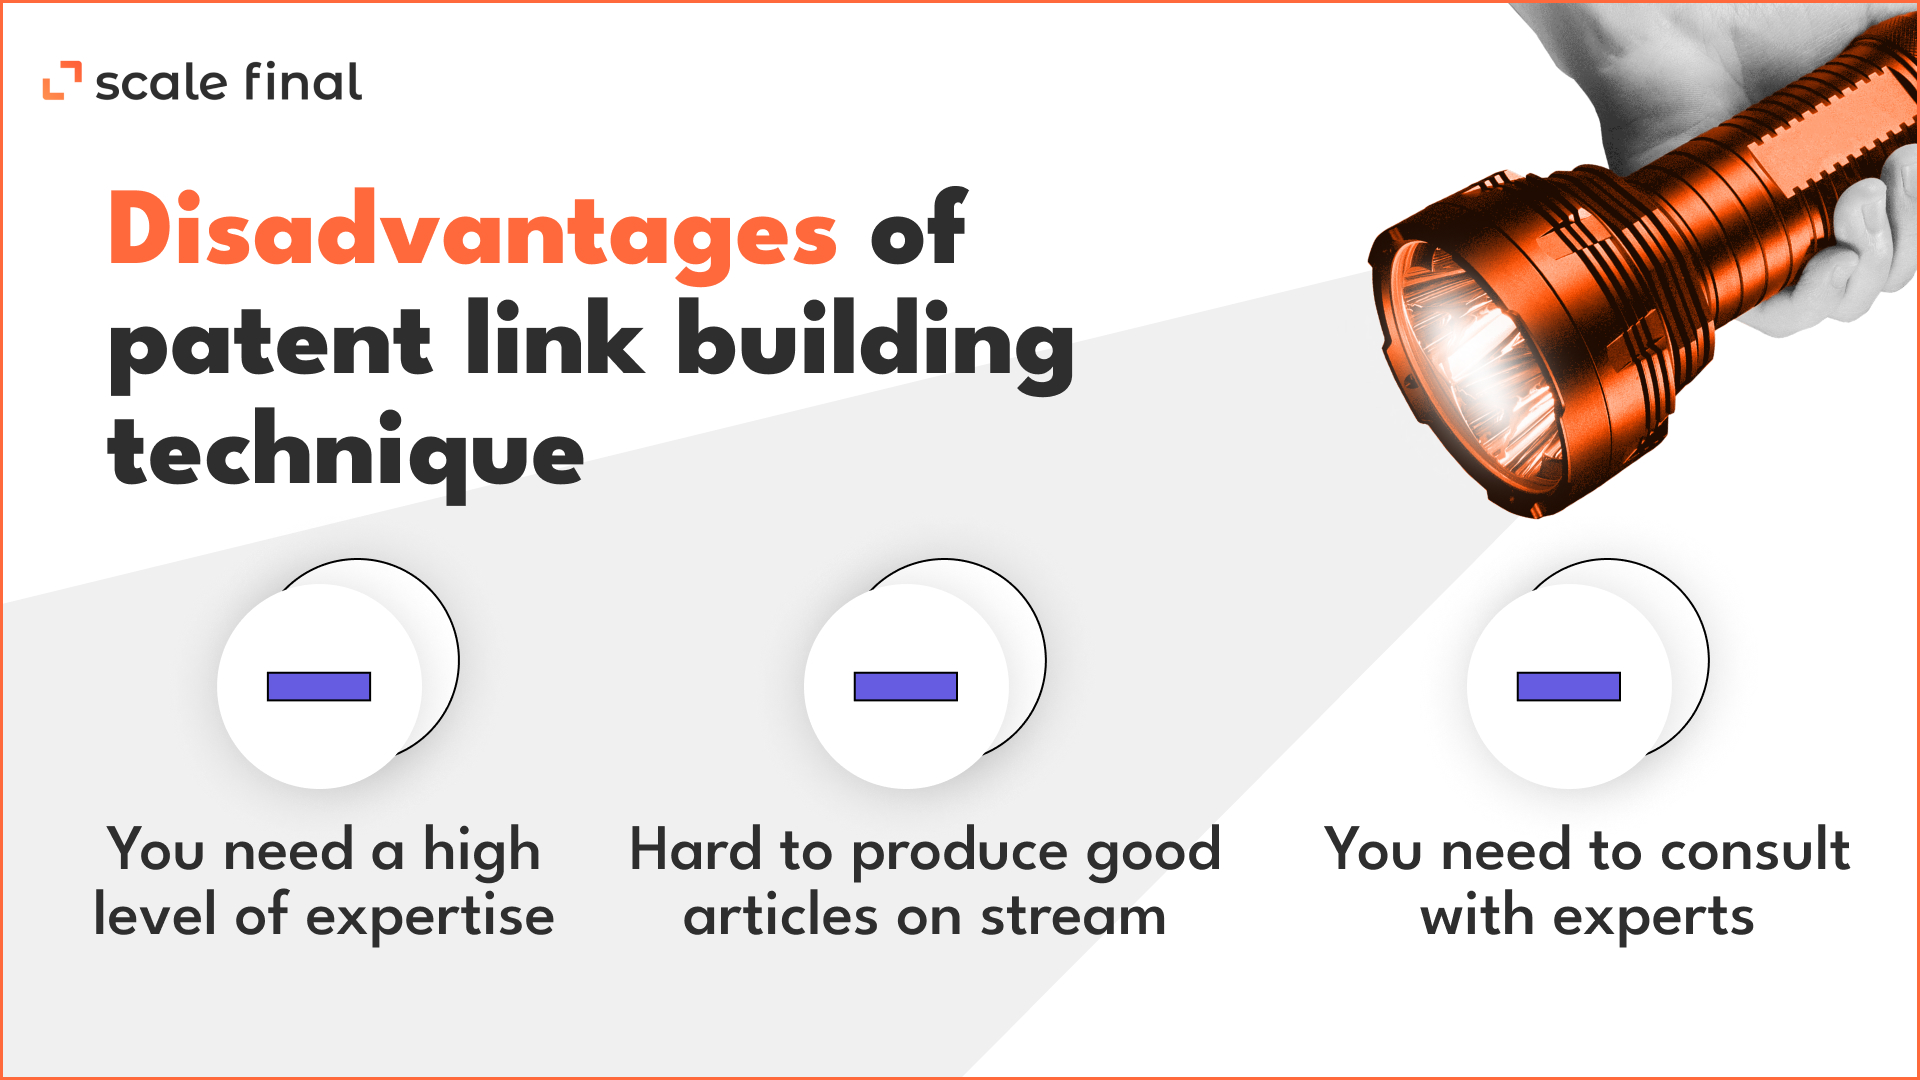 Disadvantages of patent link building technique You need a high level of expertiseHard to produce good articles on streamYou need to consult with experts